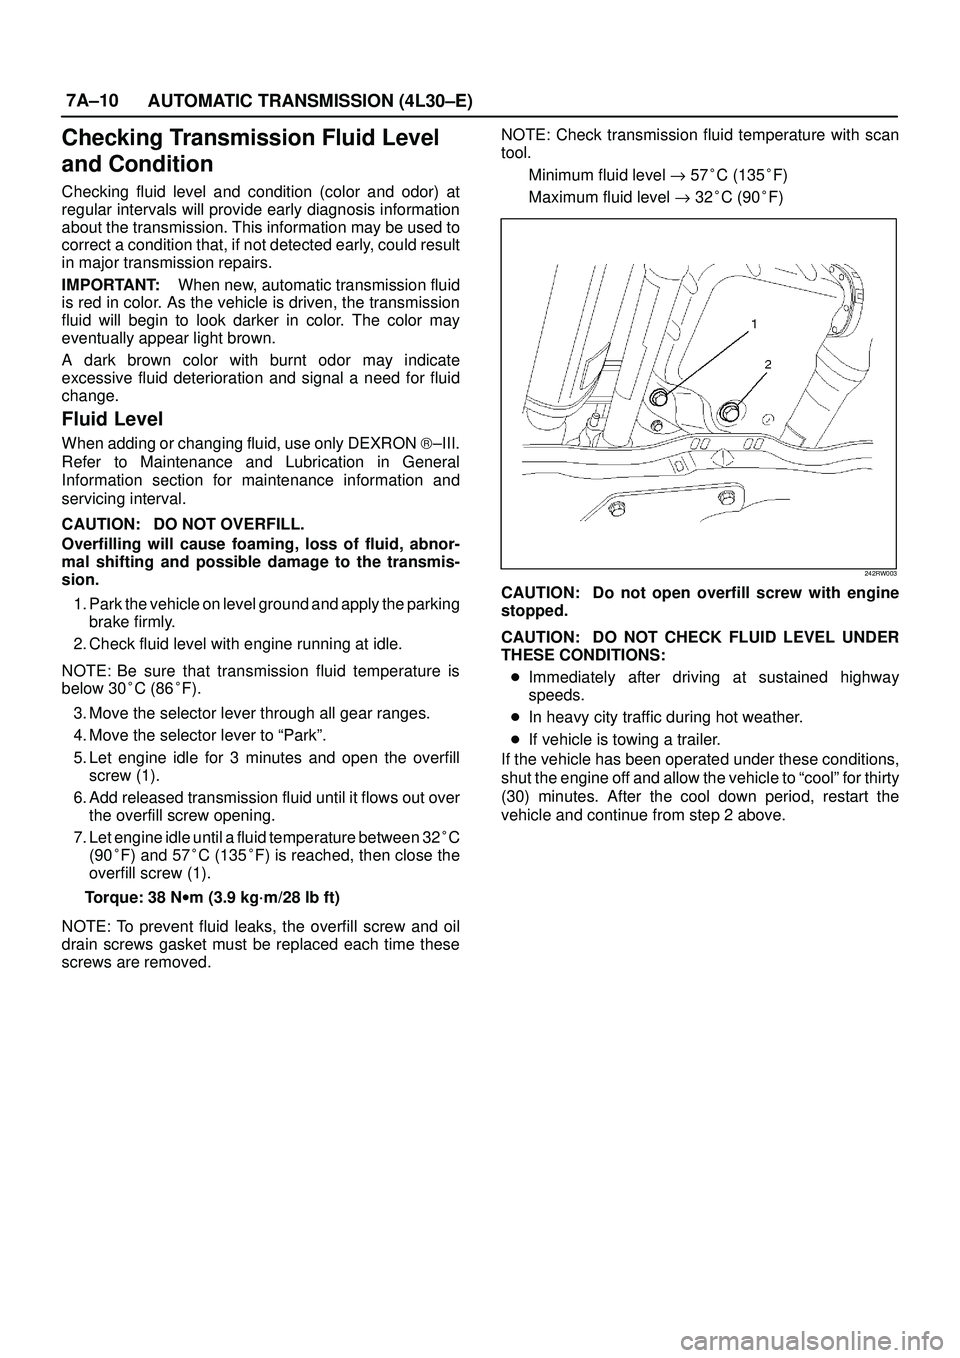 ISUZU TROOPER 1998  Service Repair Manual 7A±10
AUTOMATIC TRANSMISSION (4L30±E)
Checking Transmission Fluid Level
and Condition
Checking fluid level and condition (color and odor) at
regular intervals will provide early diagnosis informatio